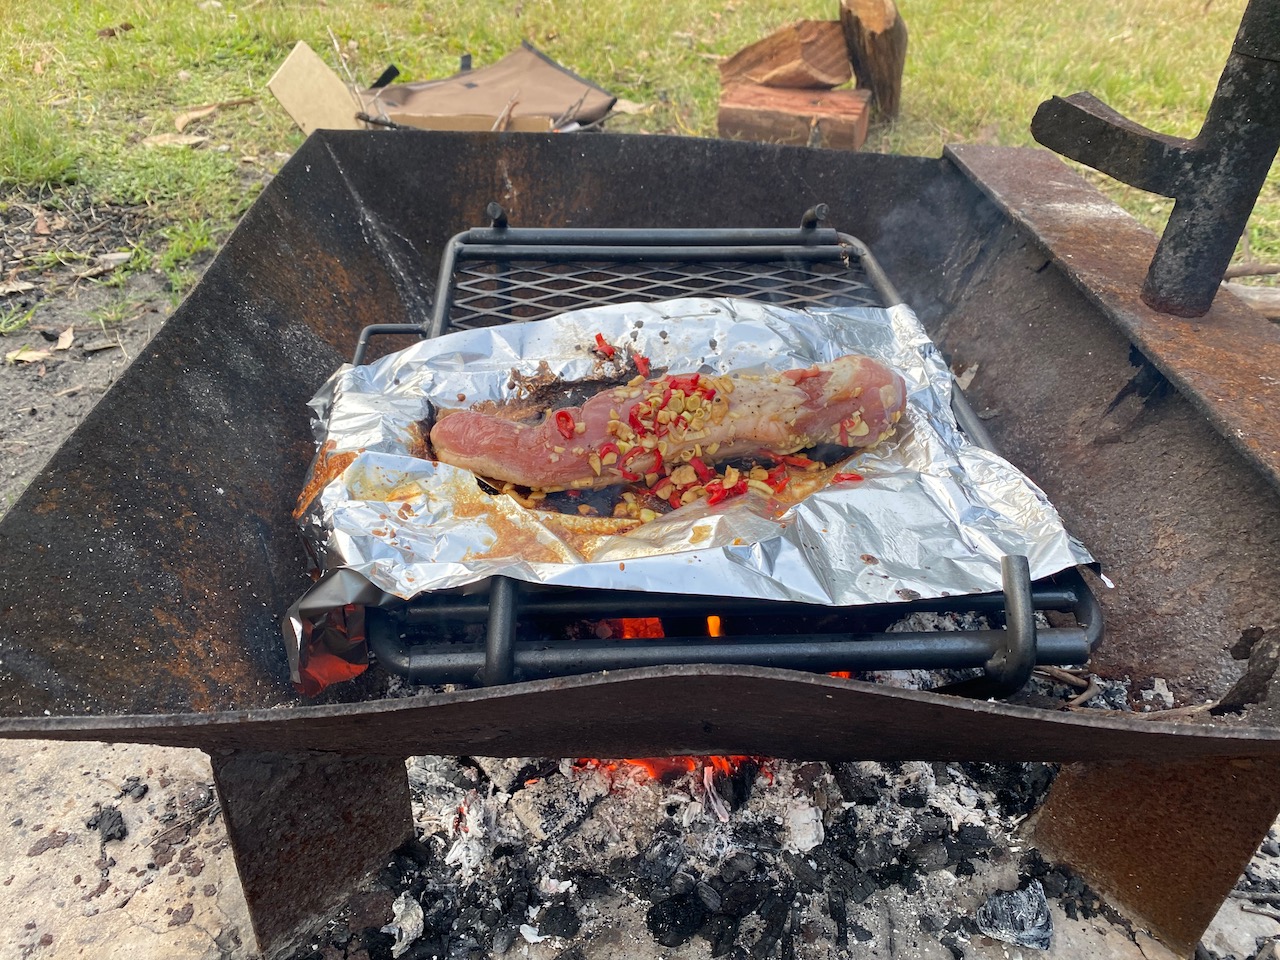 A camping grill over a wood fire, with a large piece of pork cooking on a sheet of aluminium foil